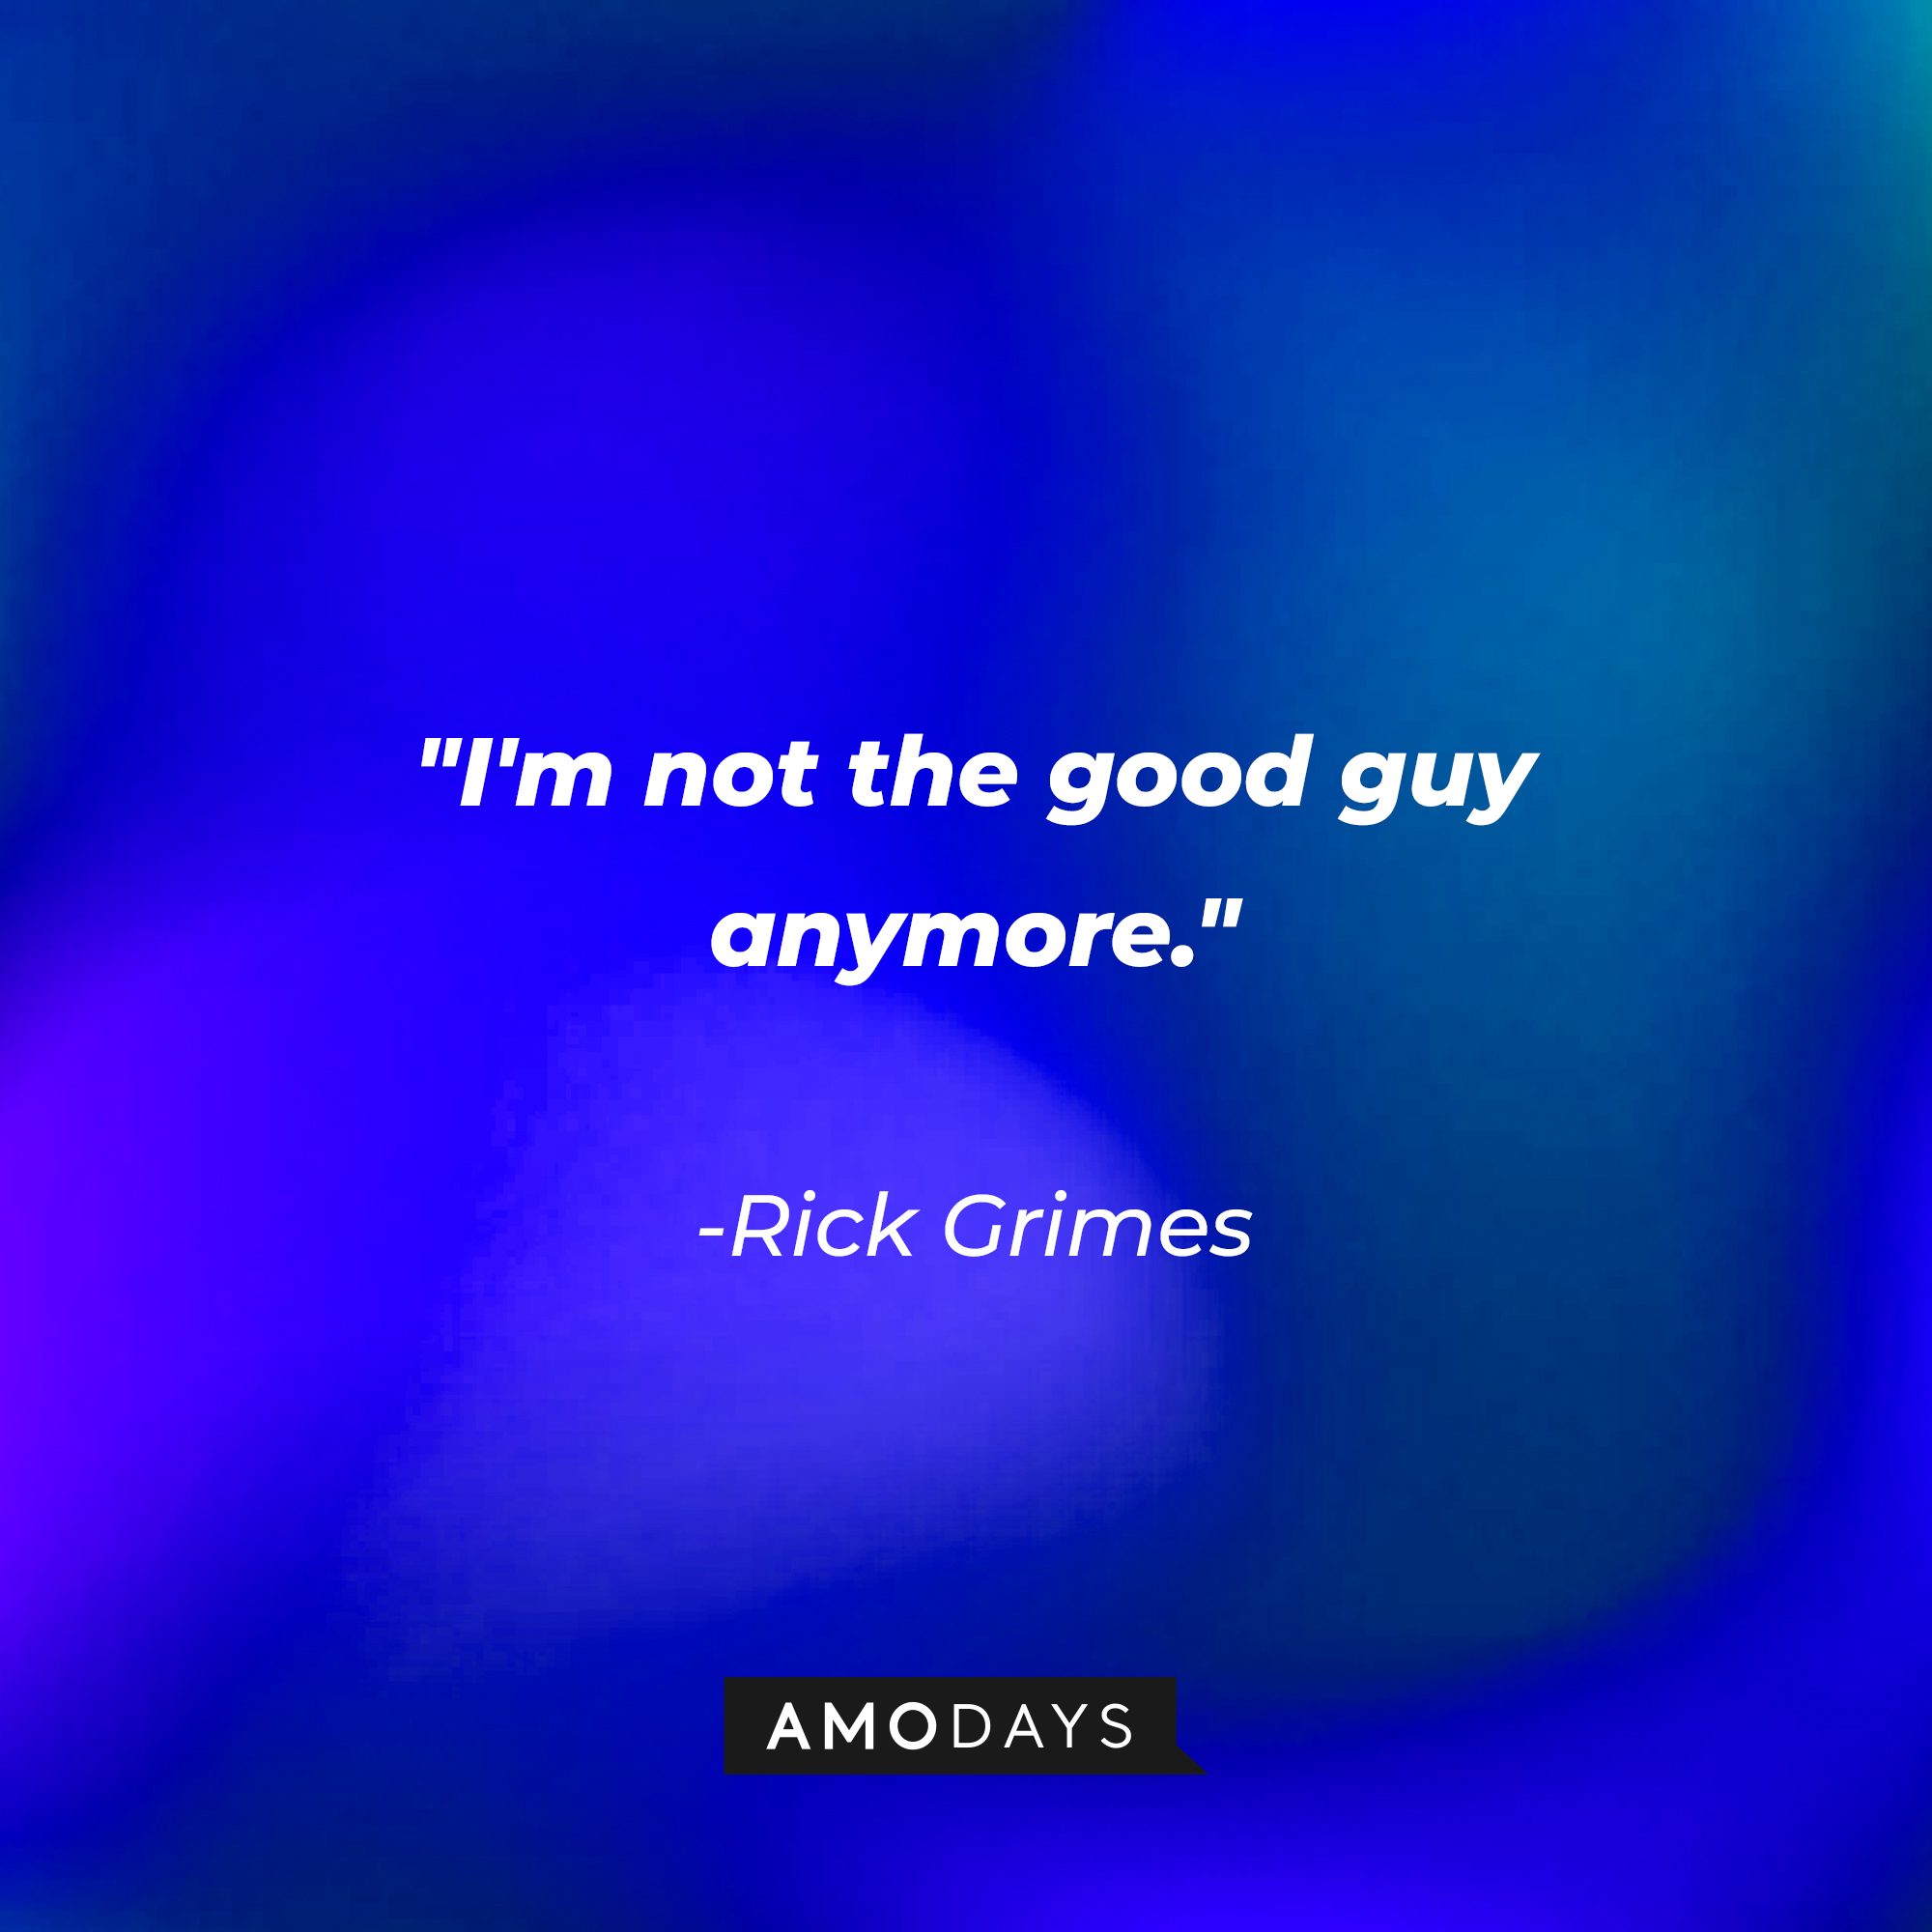 Rick Grimes' quote: "I'm not the good guy anymore." | Source: AmoDays